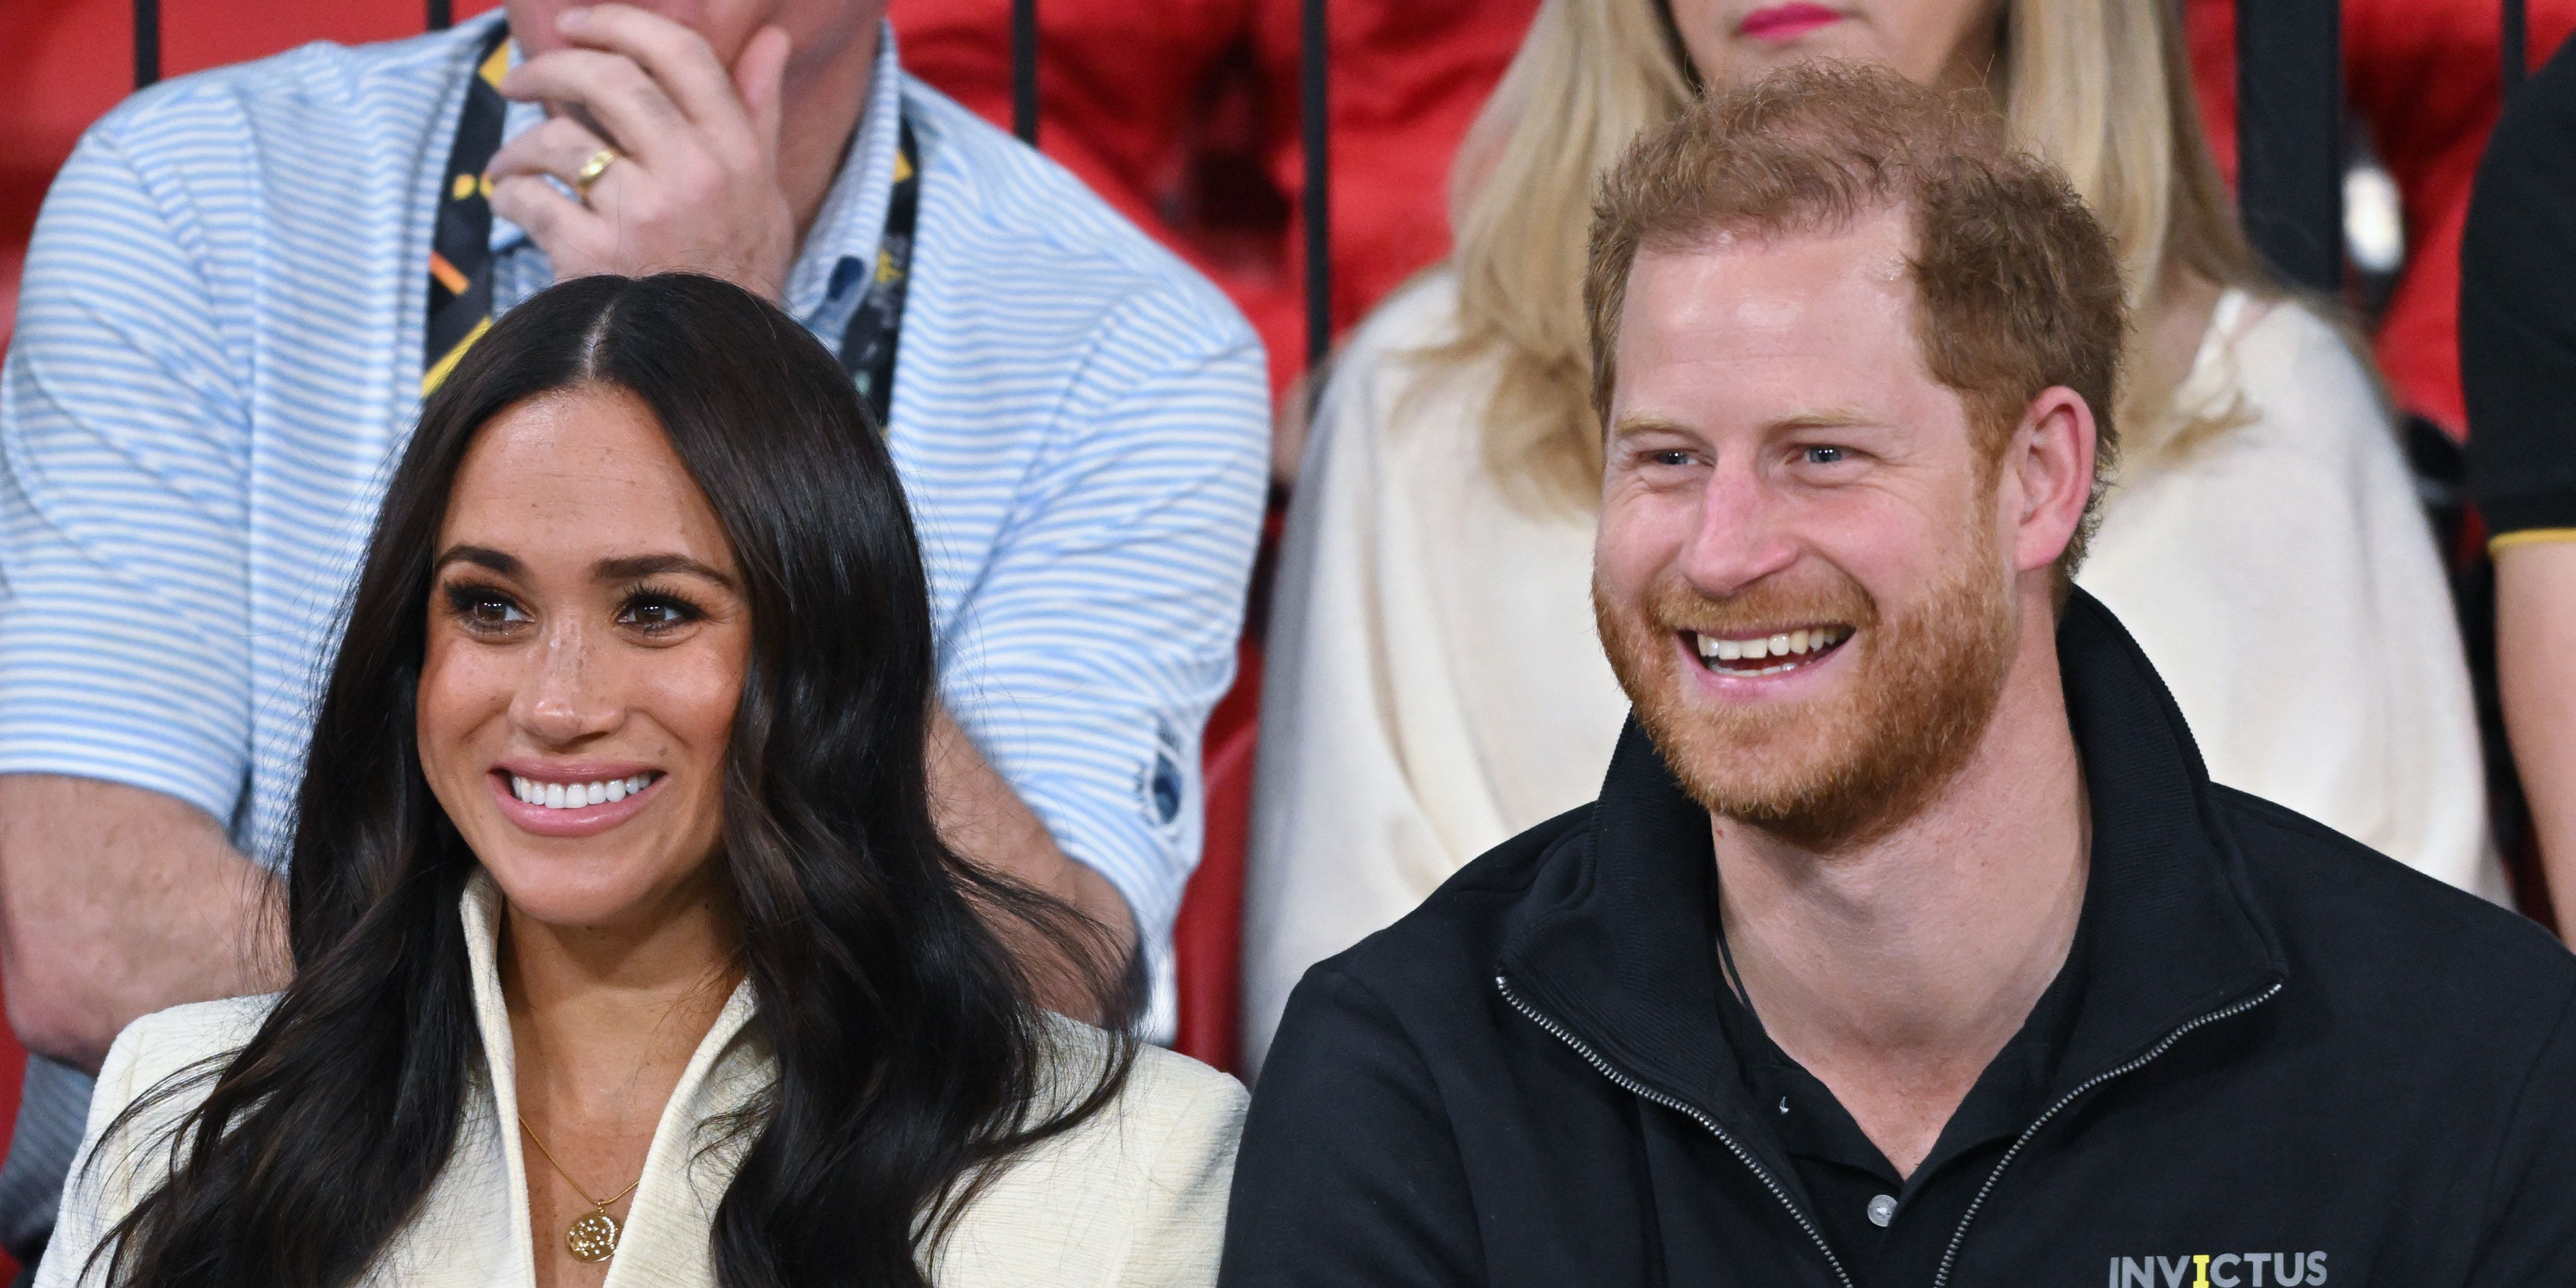 Prince Harry and Meghan Markle May Have a Docuseries on Their Home Life in the Works